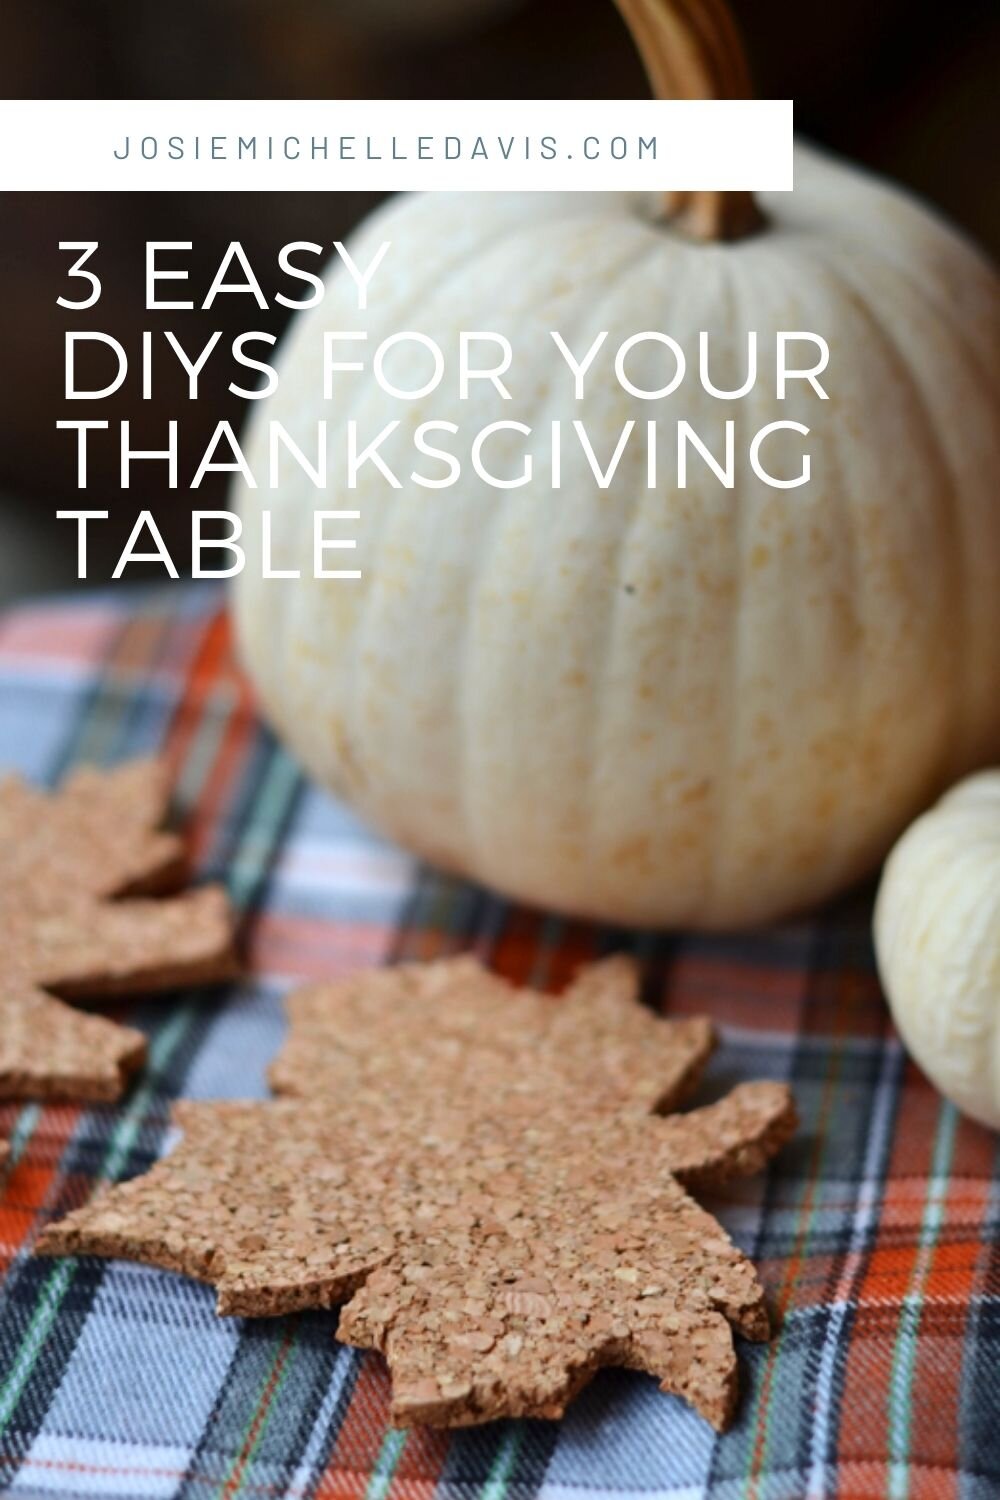 3 Easy Thanksgiving Table DIY projects